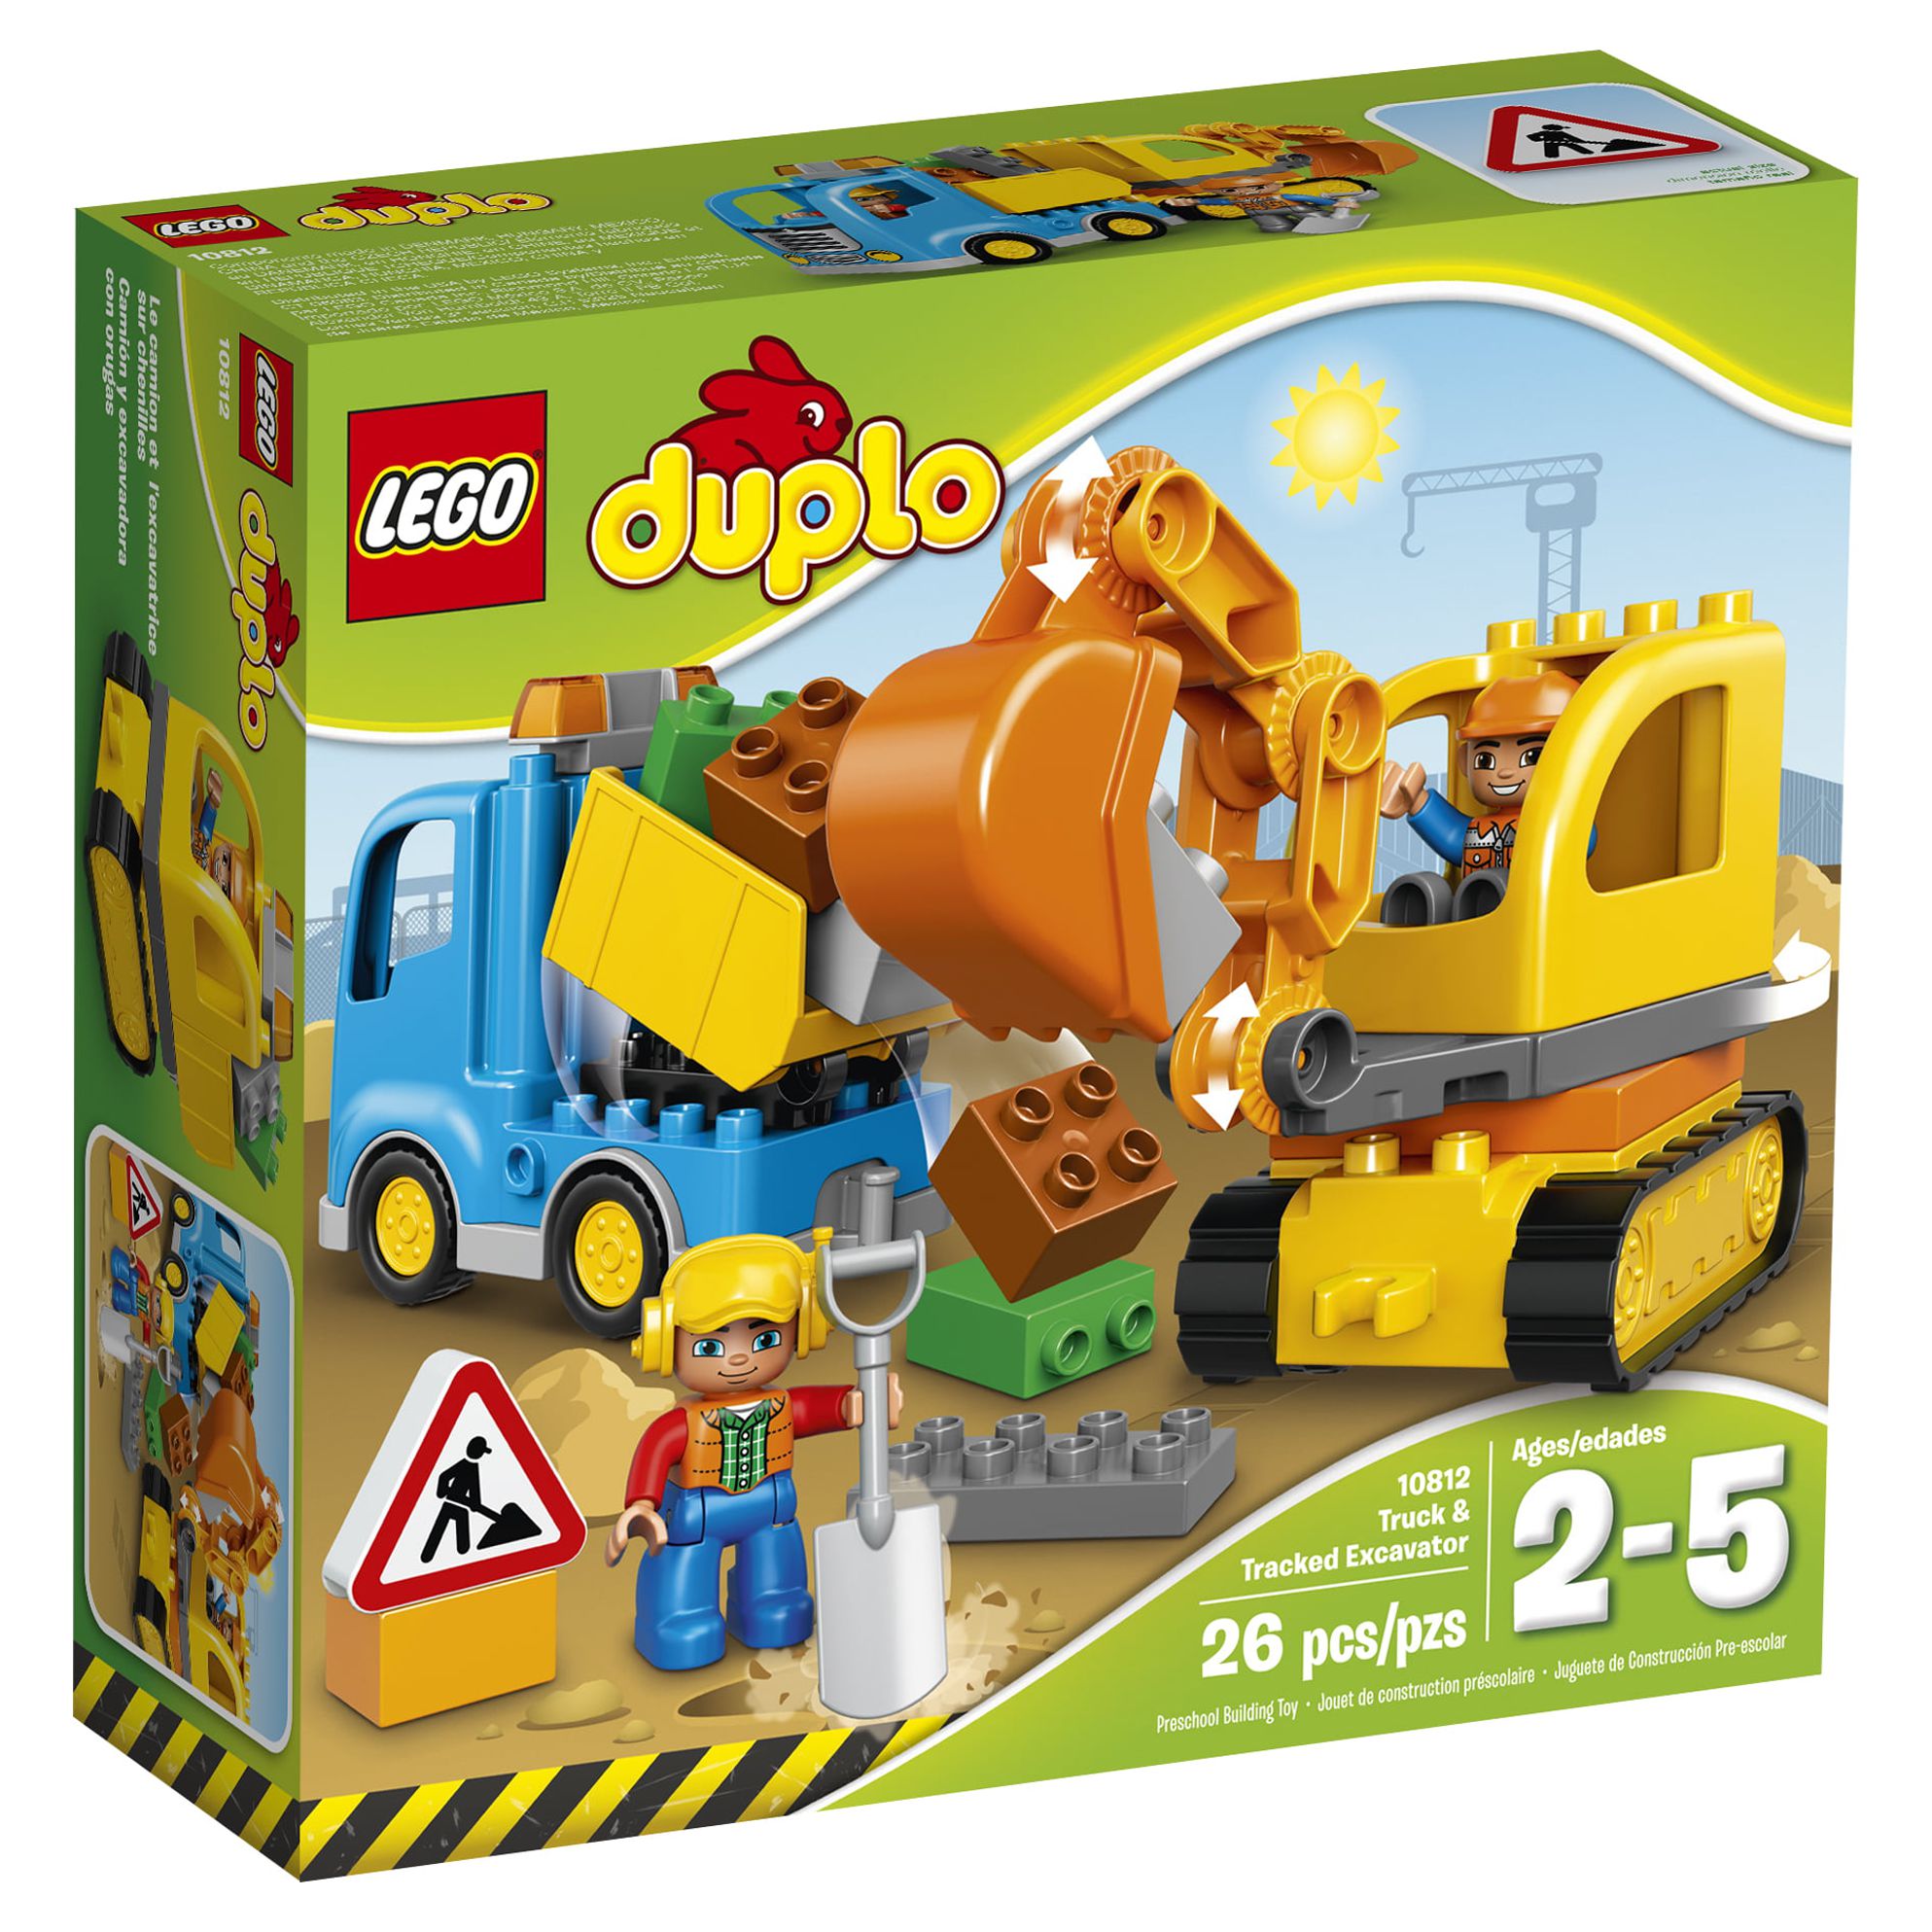 LEGO DUPLO Town Truck & Tracked Excavator 10812 (26 Pieces) - image 5 of 8